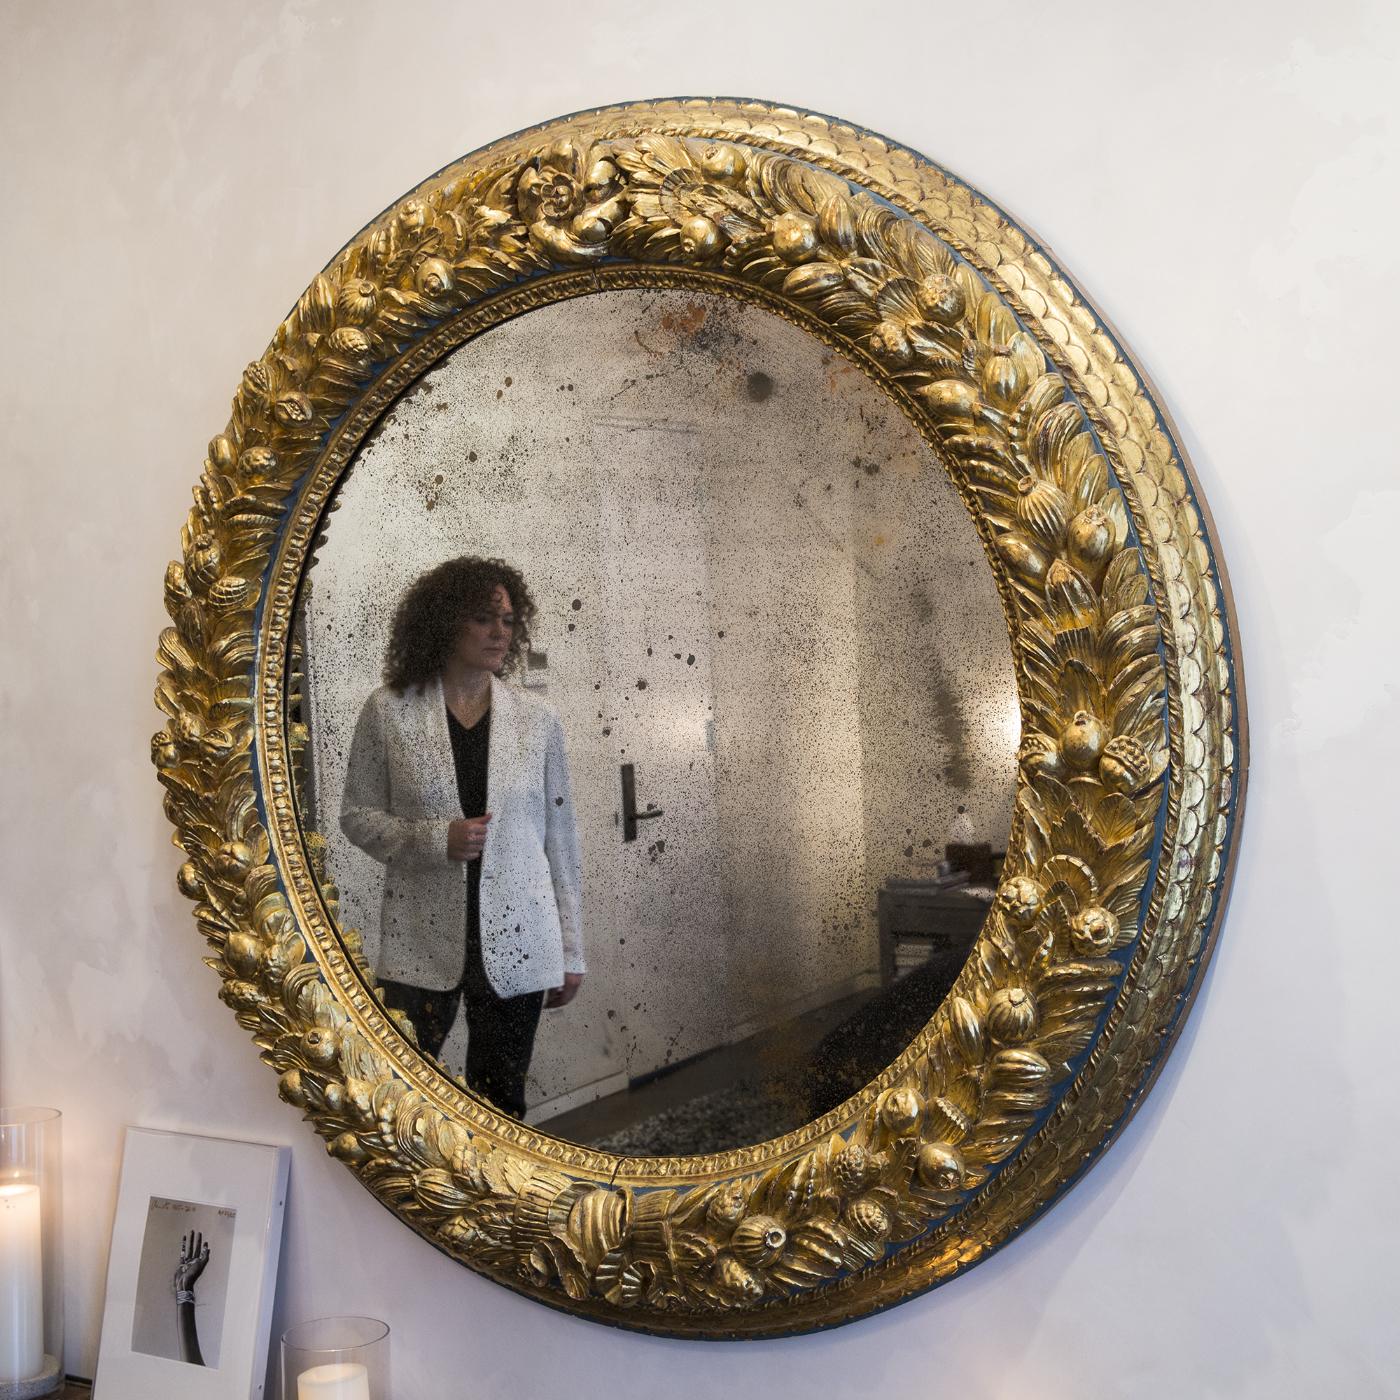 This is a hand-carved round pinewood mirror by Daniele Nencioni, finished with pure gold leaf. The piece is decorated in the stunning Robianna style with fruit and leaves, making it a fascinatingly refined ornament. It comes with a mirror with an